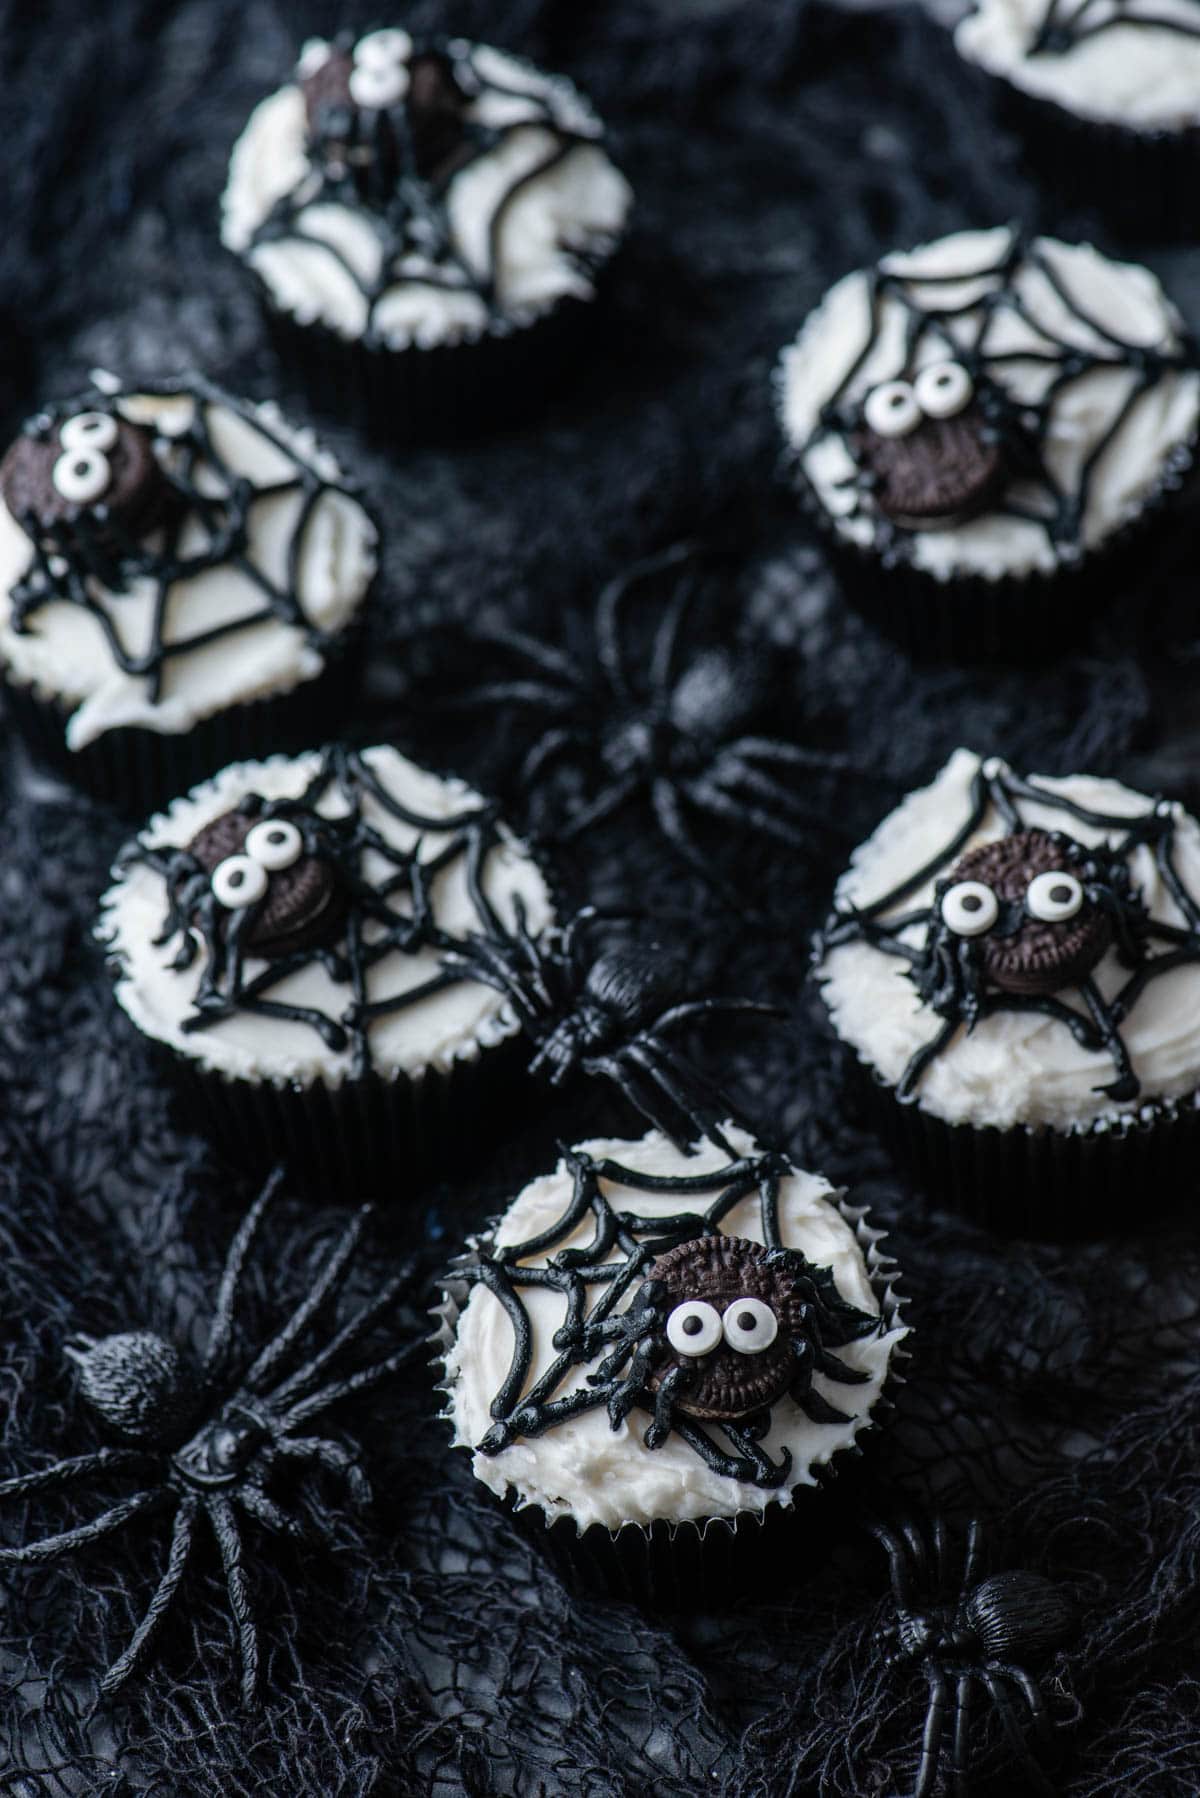 spider web cupcakes arranged on a black netting with black plastic spiders around them